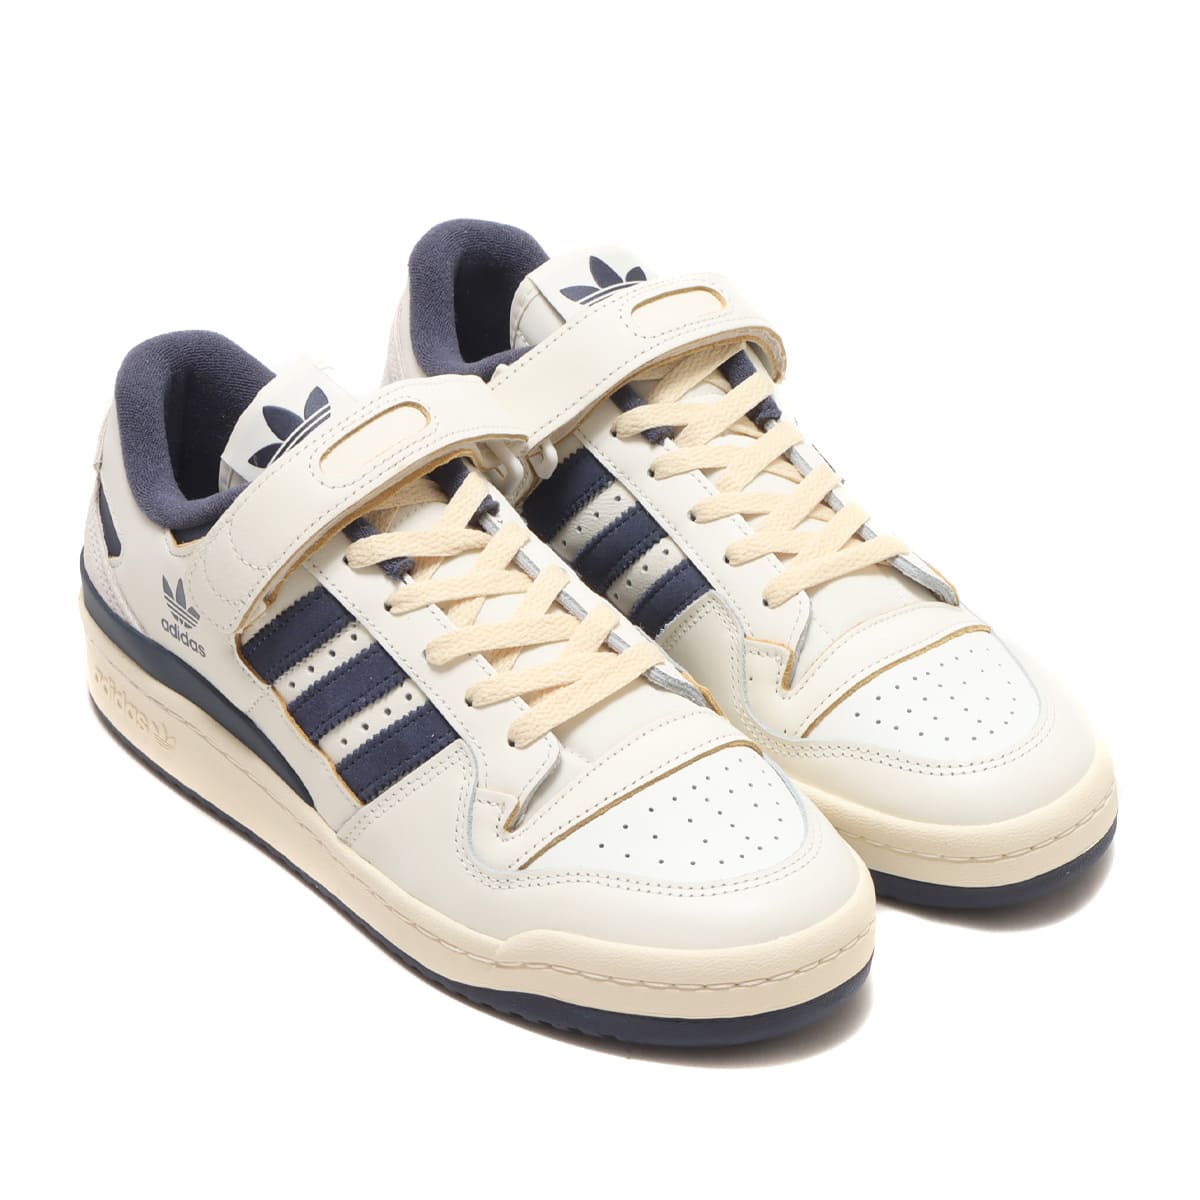 frihed Levere oversøisk adidas FORUM 84 LOW OFF WHITE/SHADOW NAVY/CREAM WHITE 23FW-I